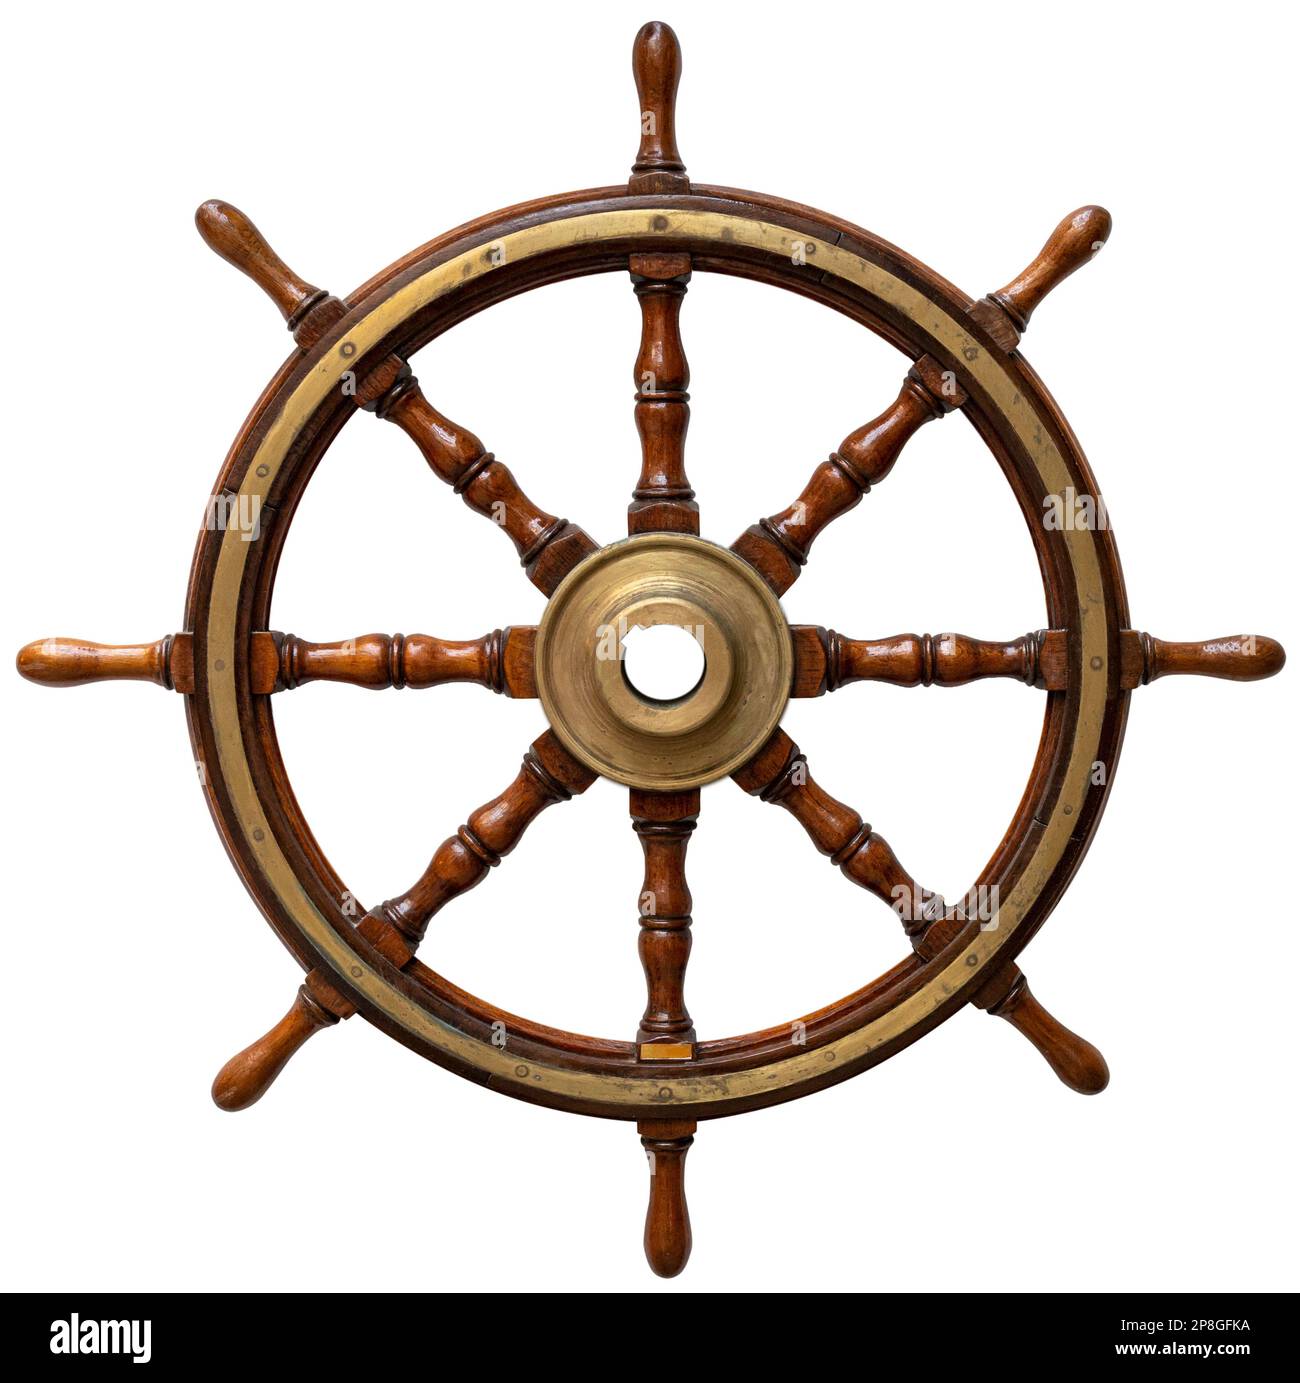 Old ship wooden steering wheel rudder isolated on white background Stock Photo